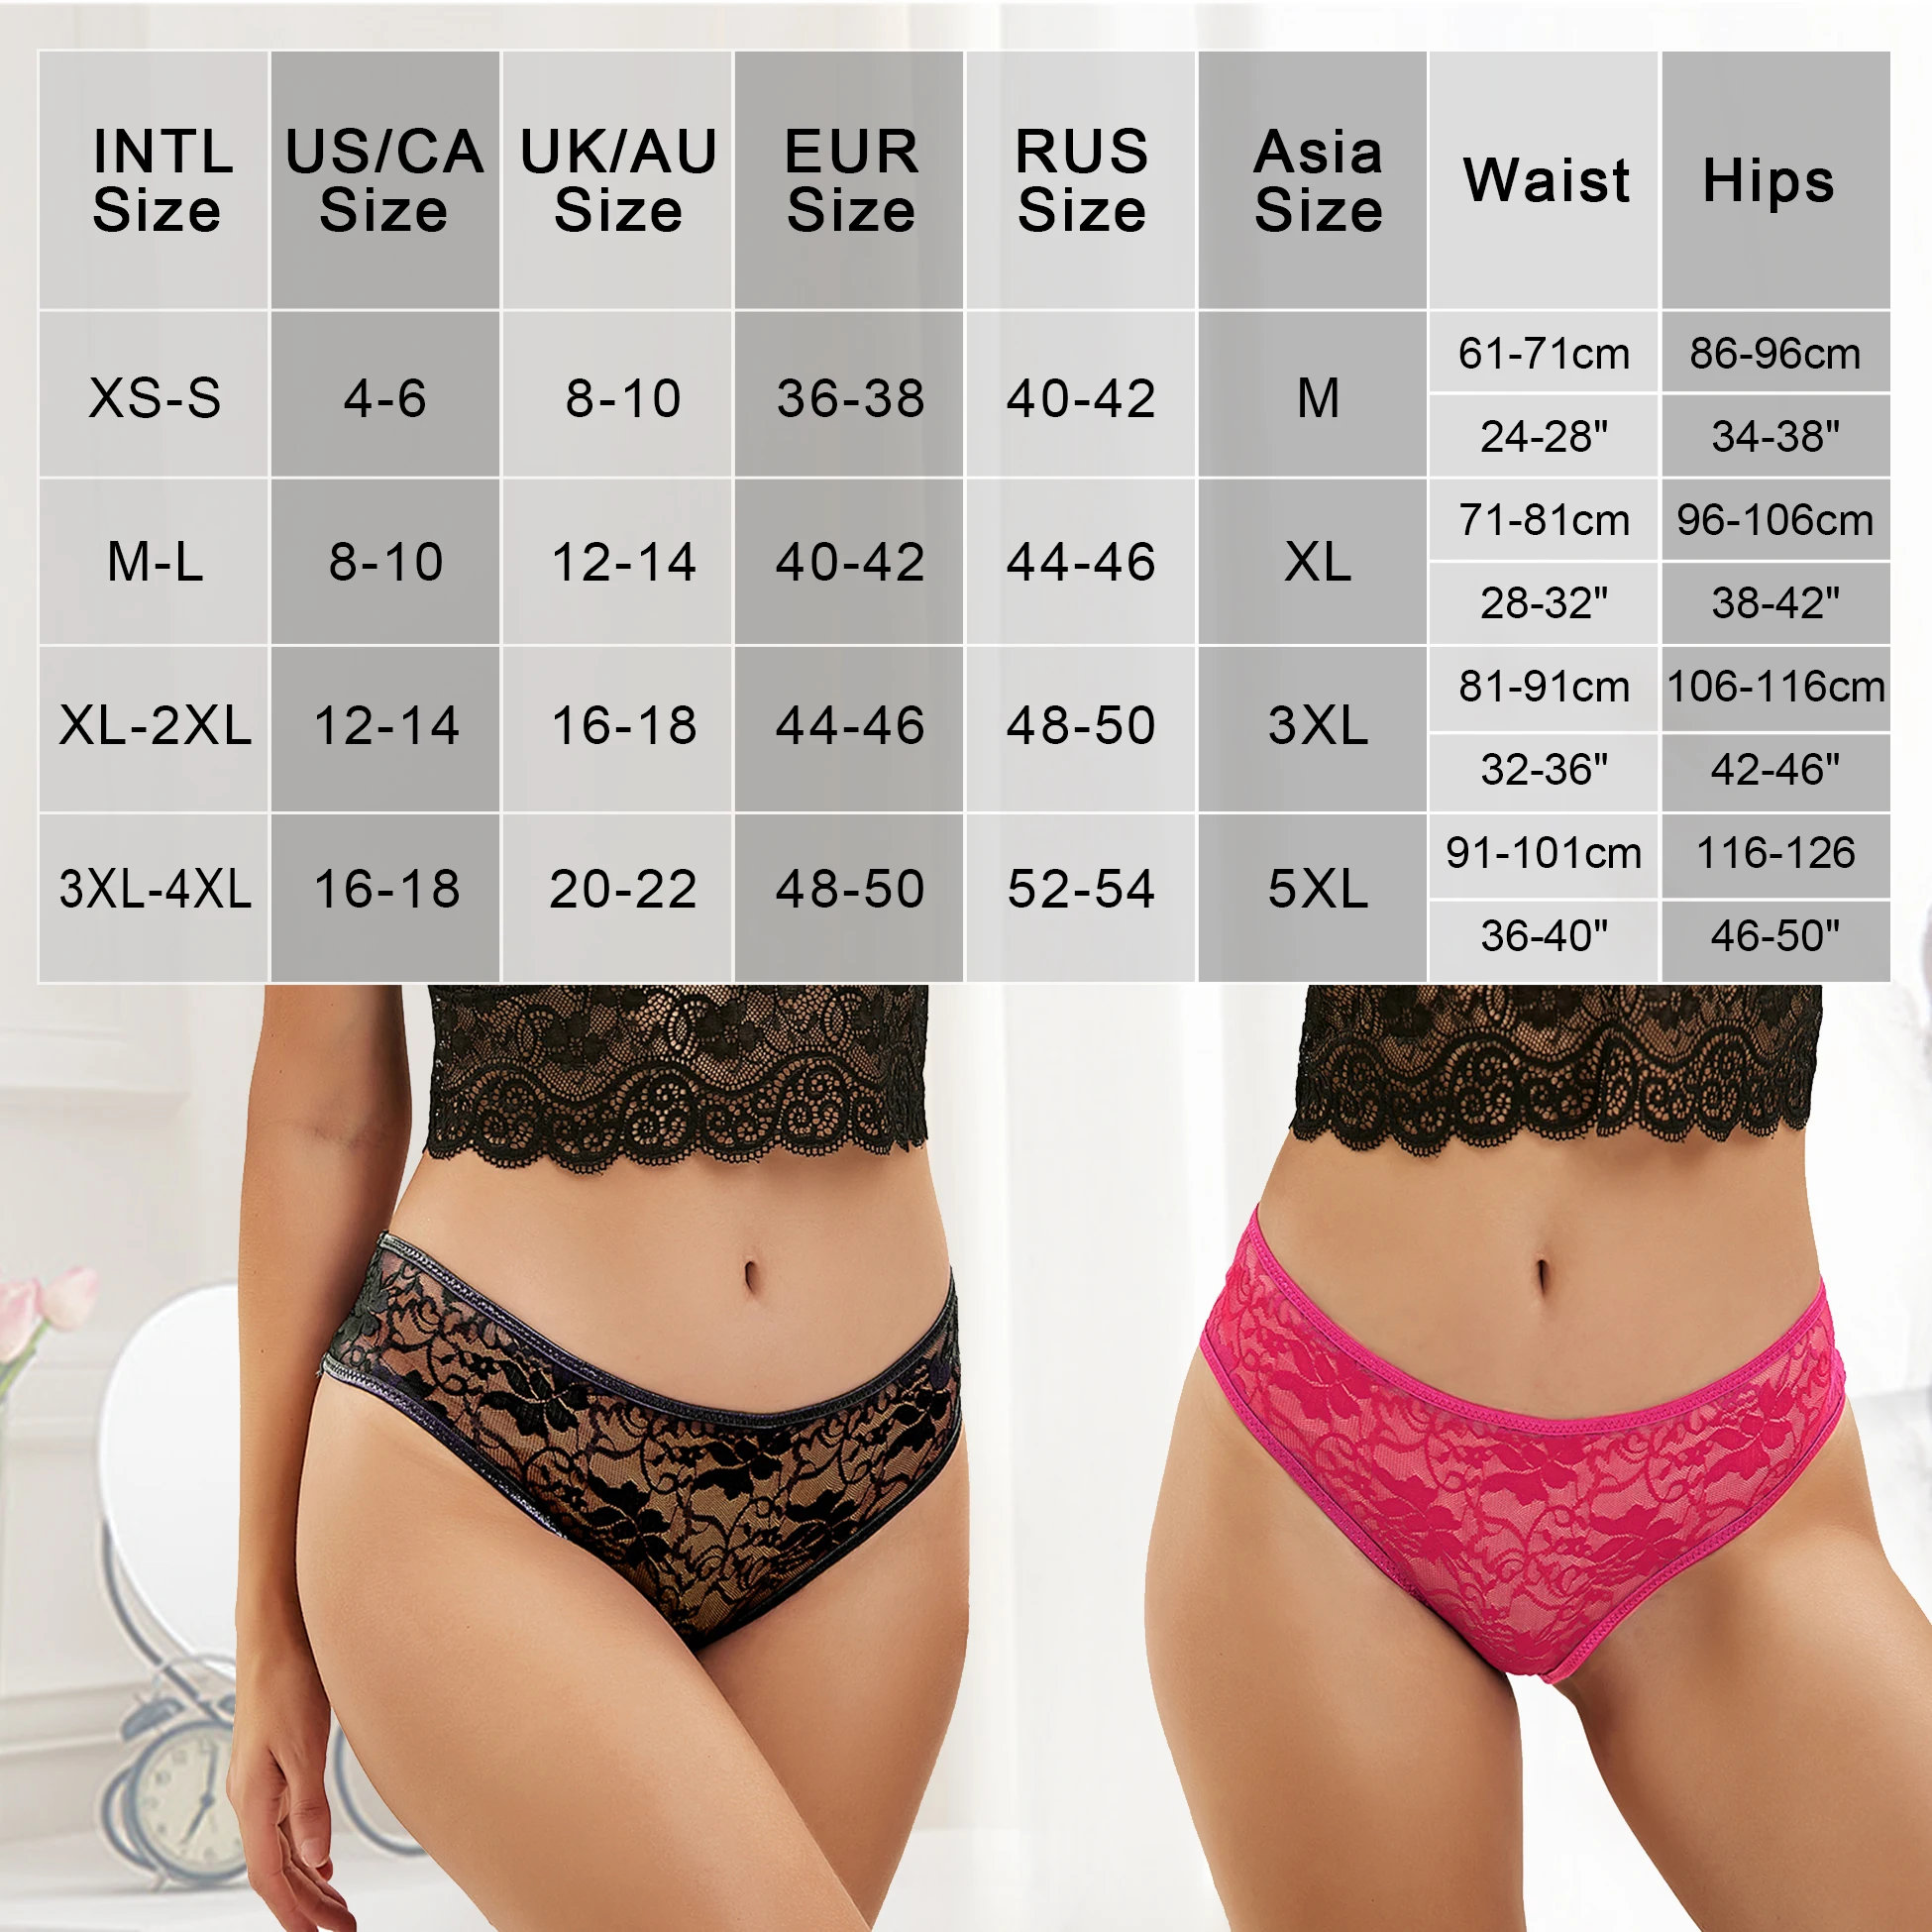 Pink Women's Sheer Big Size Underwear Transparent Lace Ladies Wholesale Sexy Lingerie Plus Size Panties - Buy Panties,Wholesale Ladies Panty,Sexy Panties Product on Alibaba.com